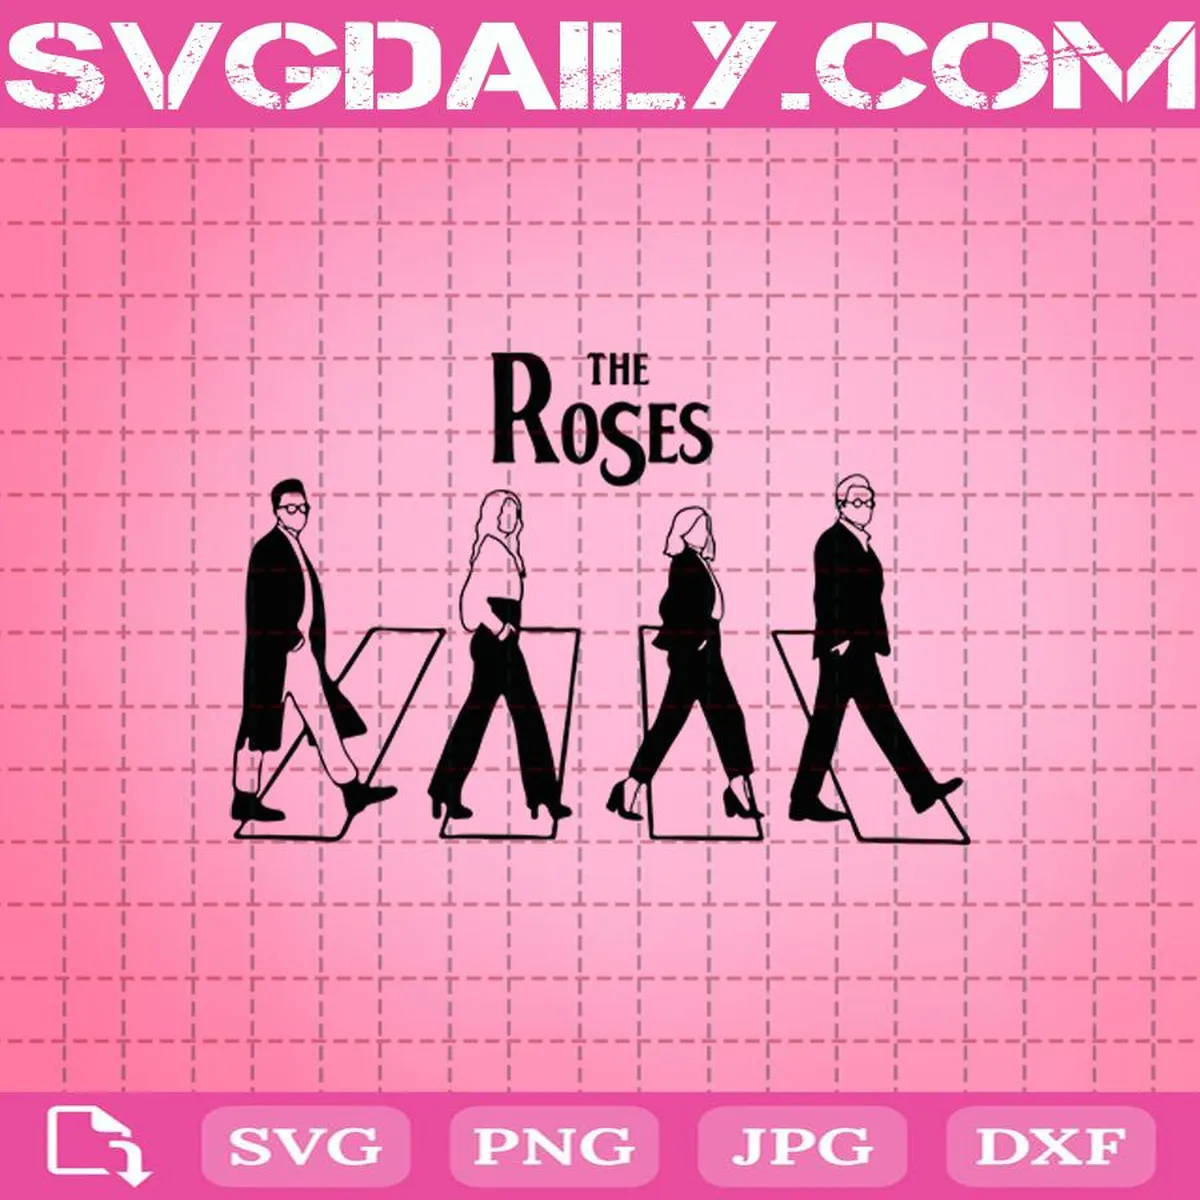 The Roses Abbey Road Schitts Creek Svg, The Roses Svg, Abbey Road Svg, Schitts Creek Svg, The Roses Svg Png Dxf Eps